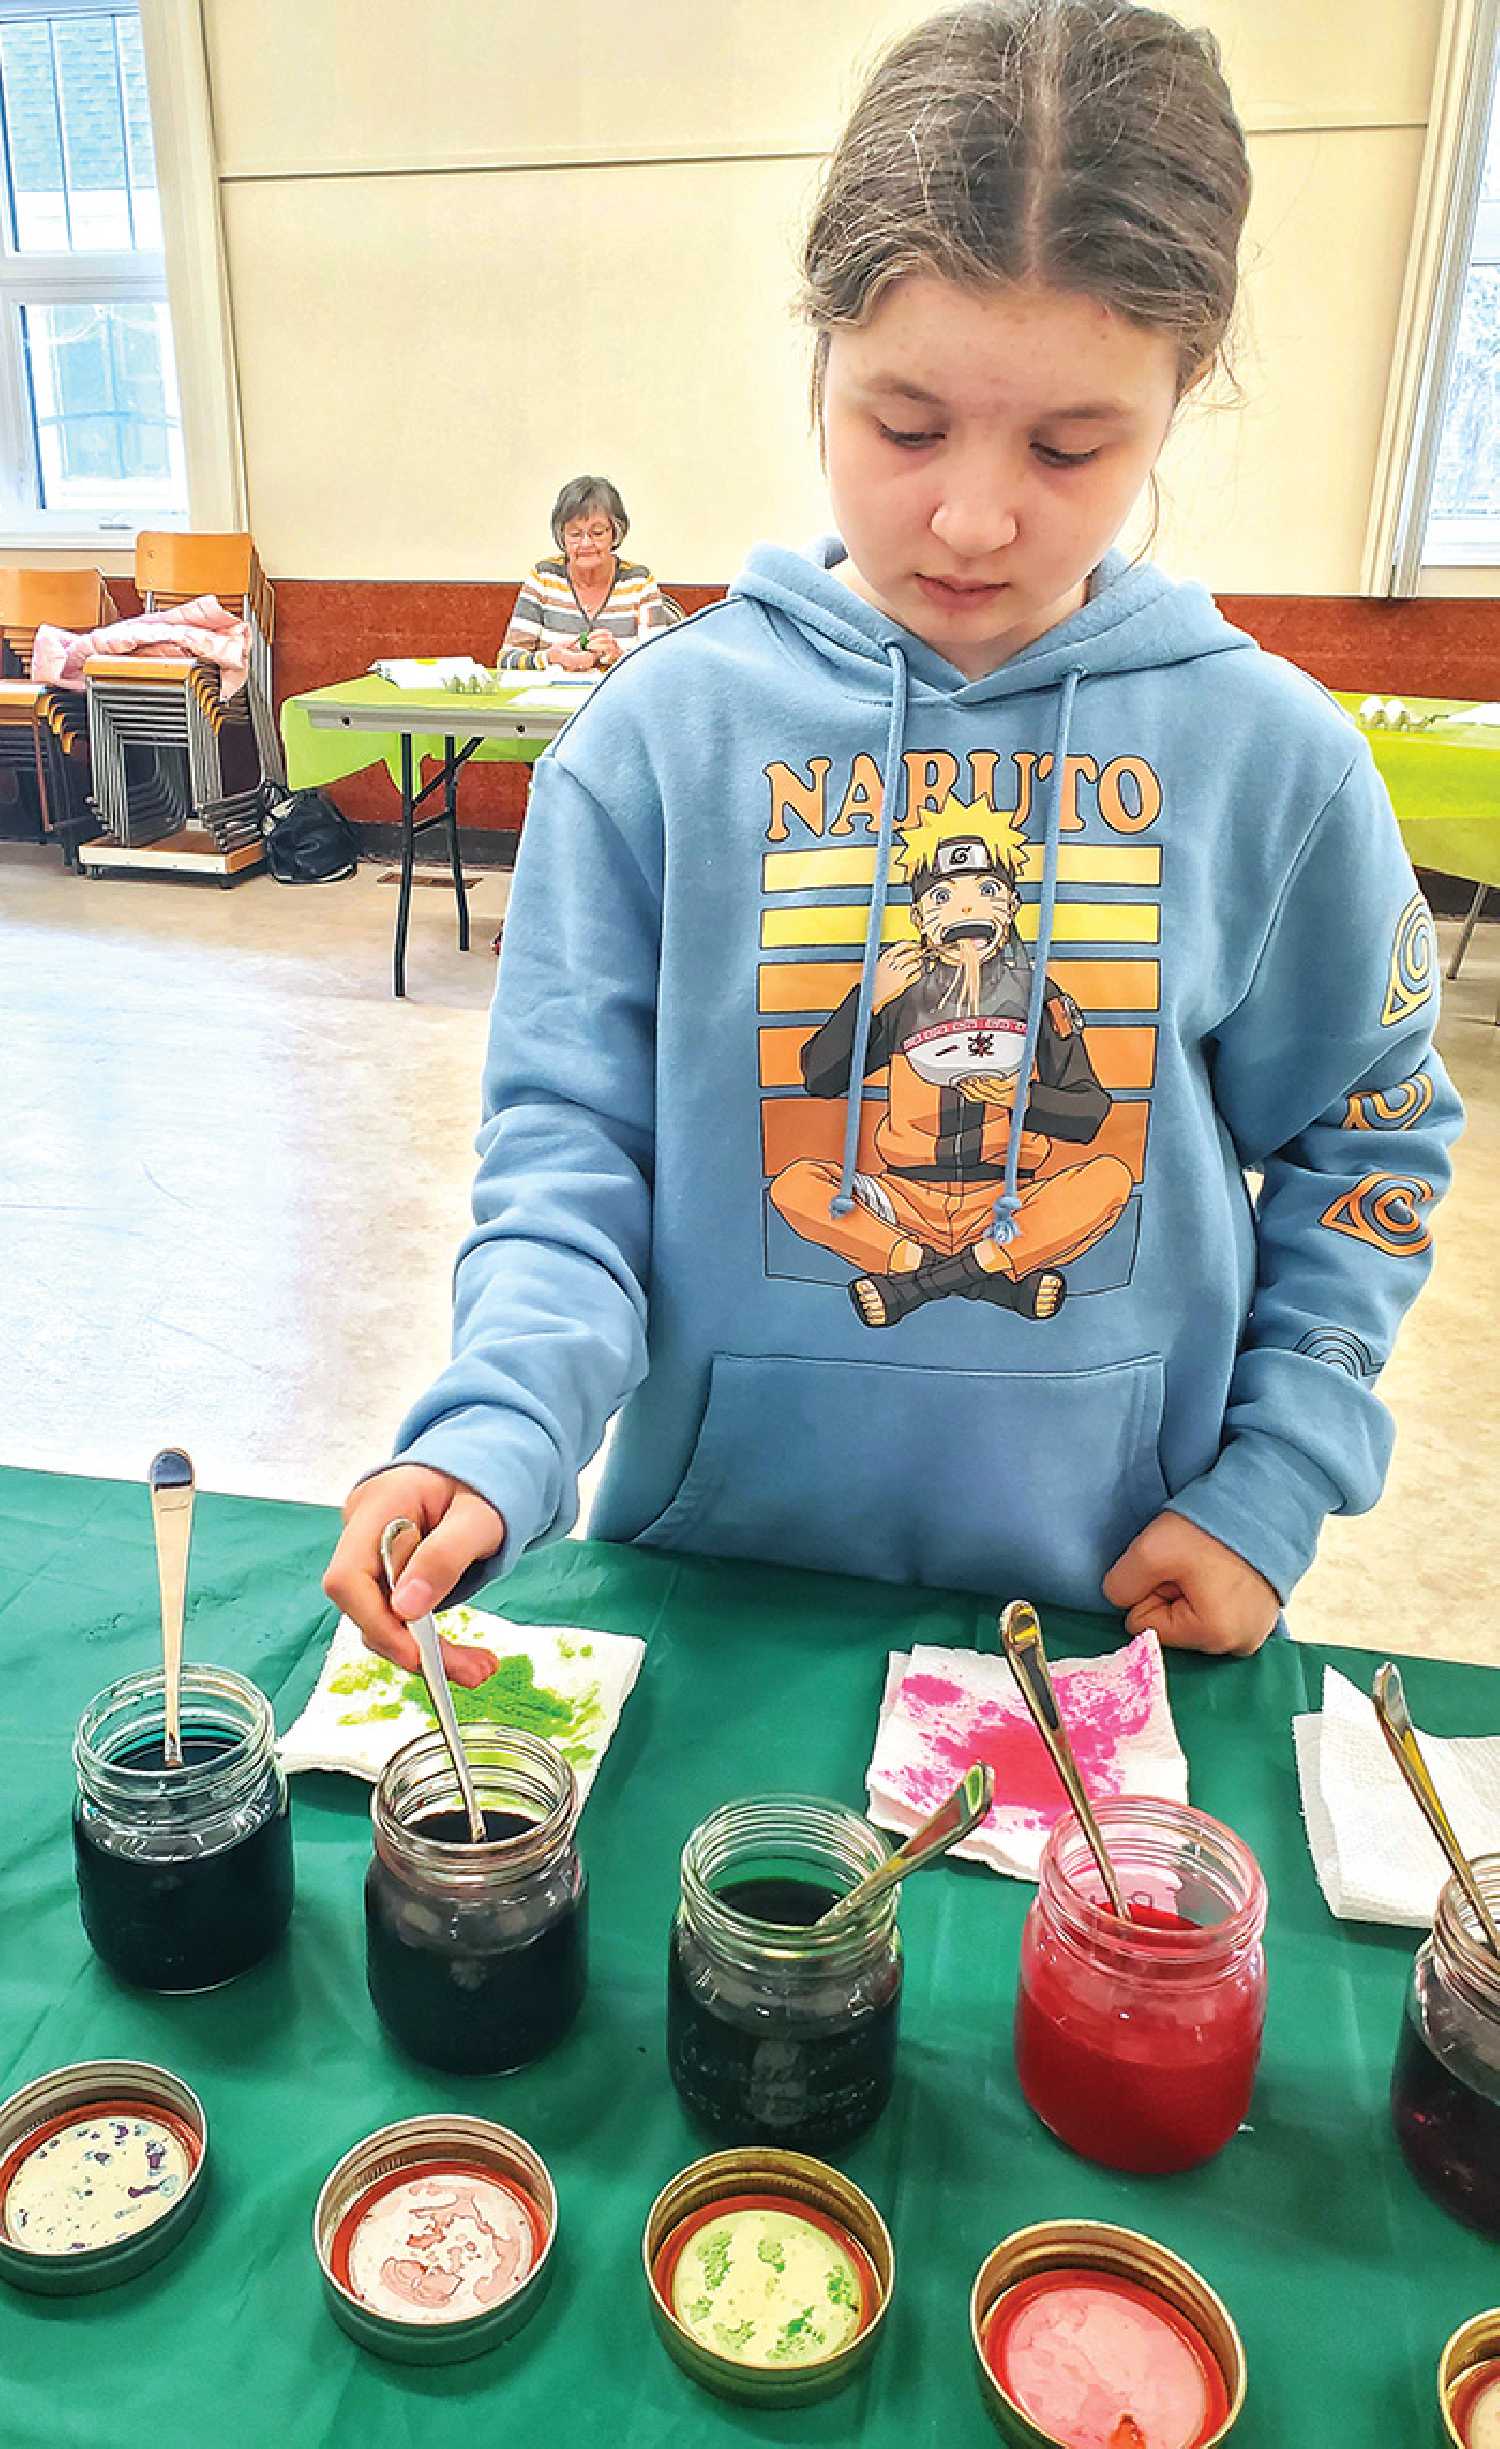 The Moosomin Visual Arts Centre has started an after school program for children ages 7-12.